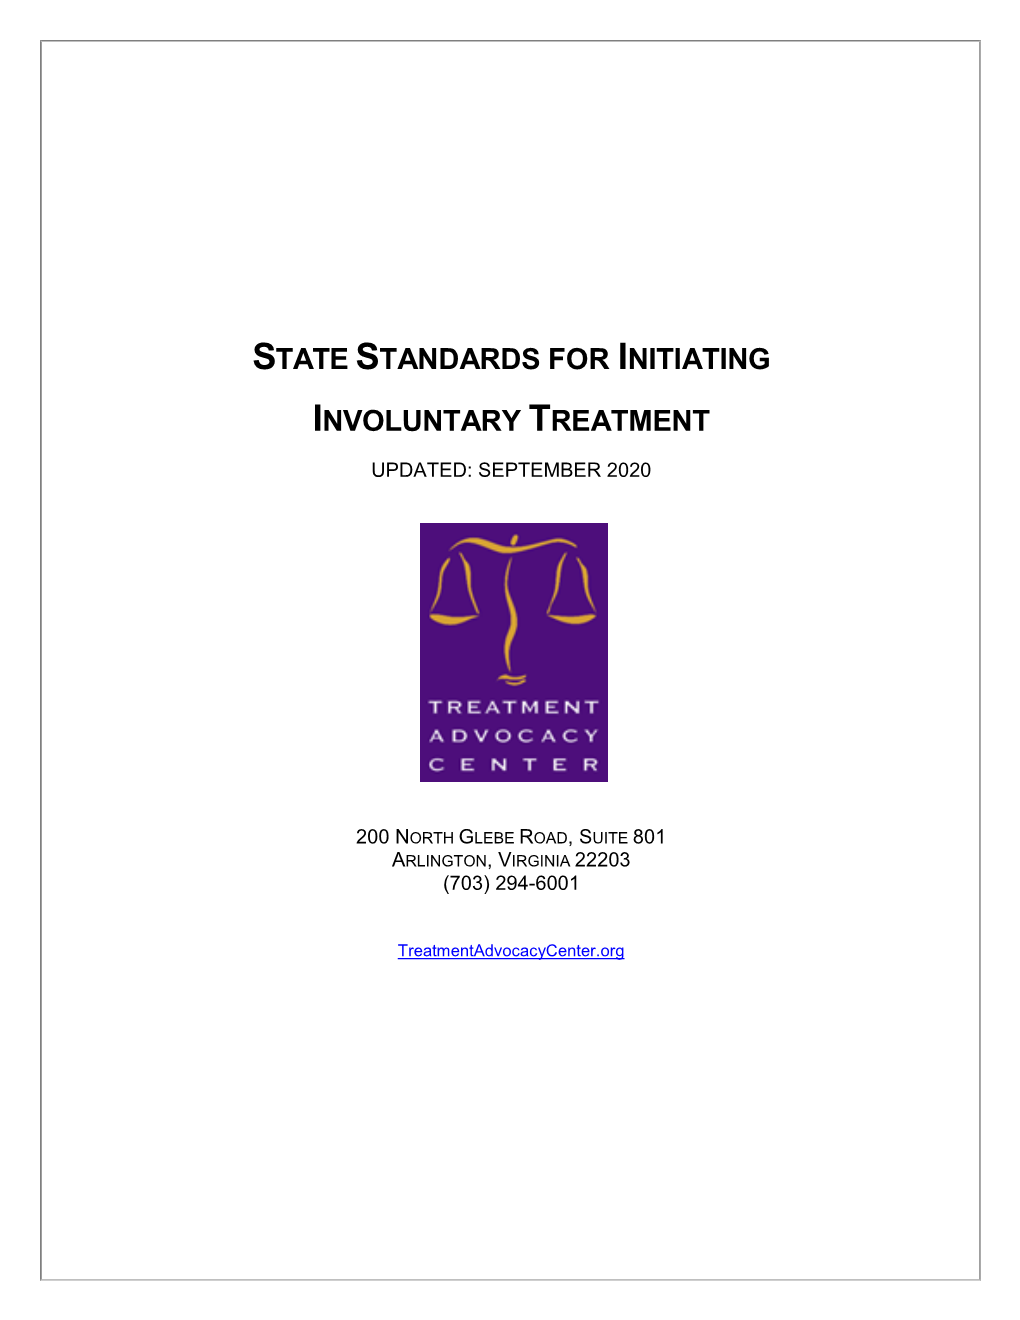 State Standards for Initiating Involuntary Treatment Updated: September 2020